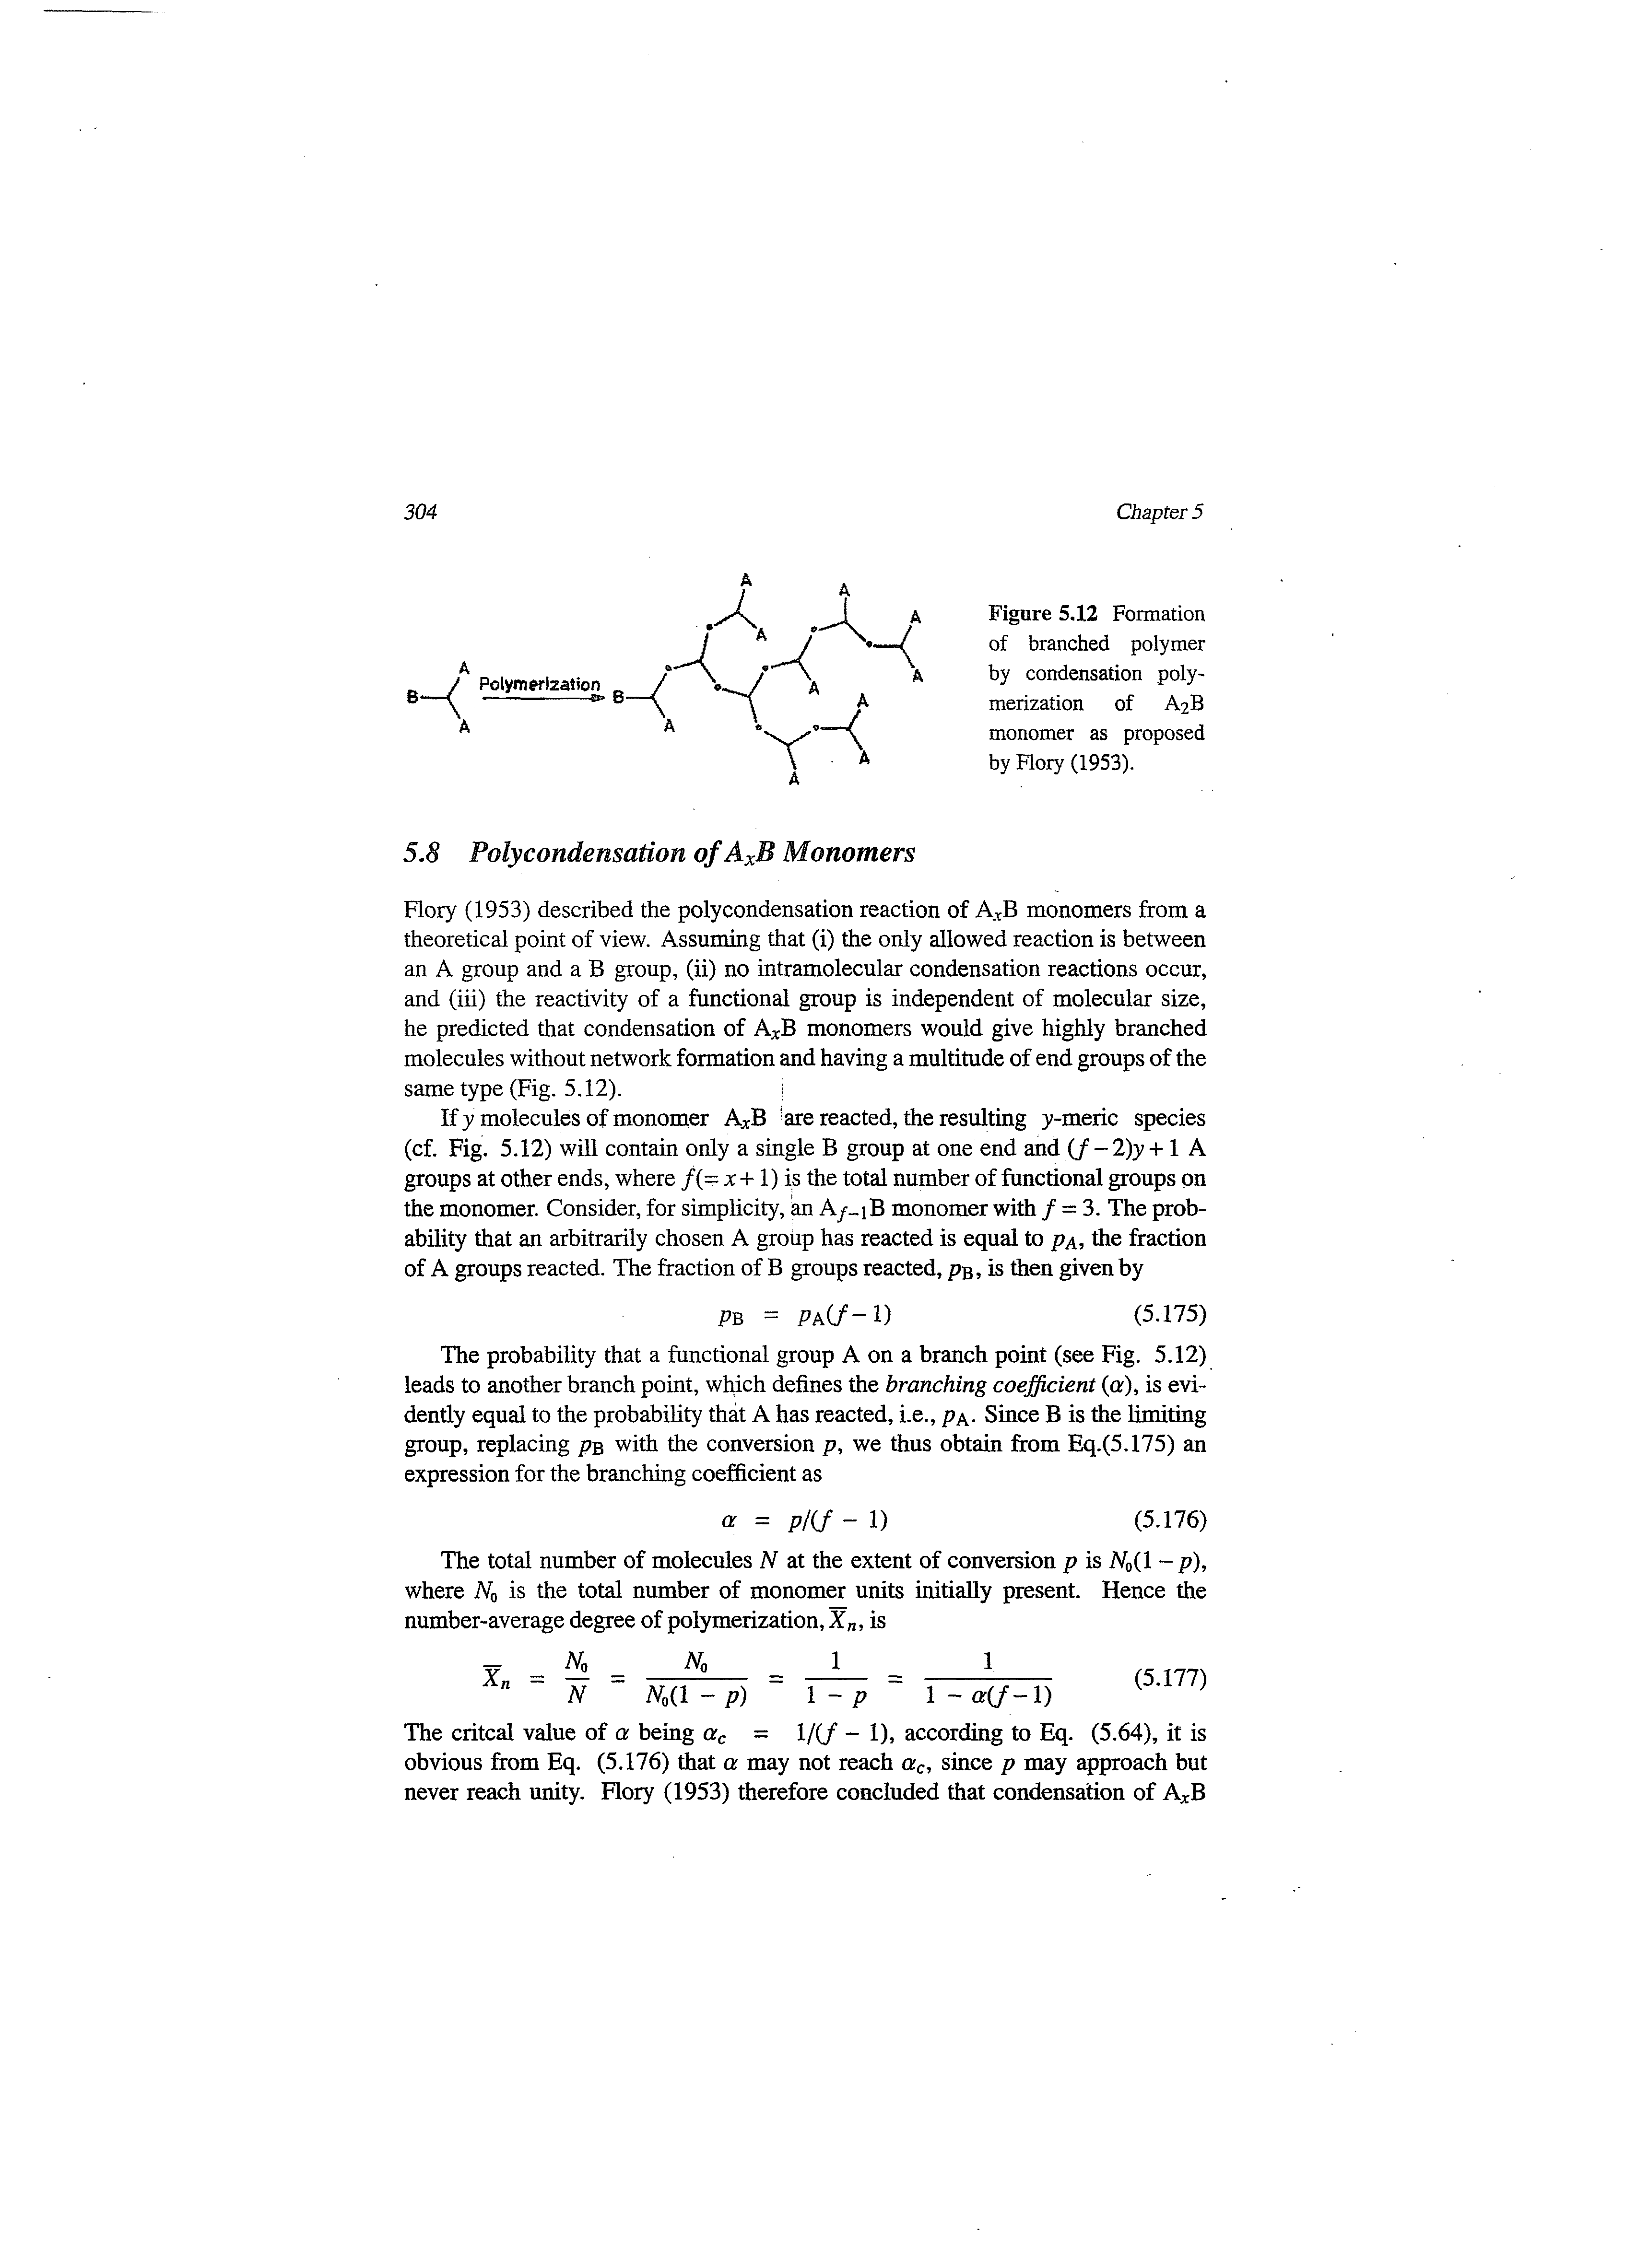 Figure 5.12 Formation of branched polymer by condensation polymerization of A2B monomer as proposed by Flory (1953).